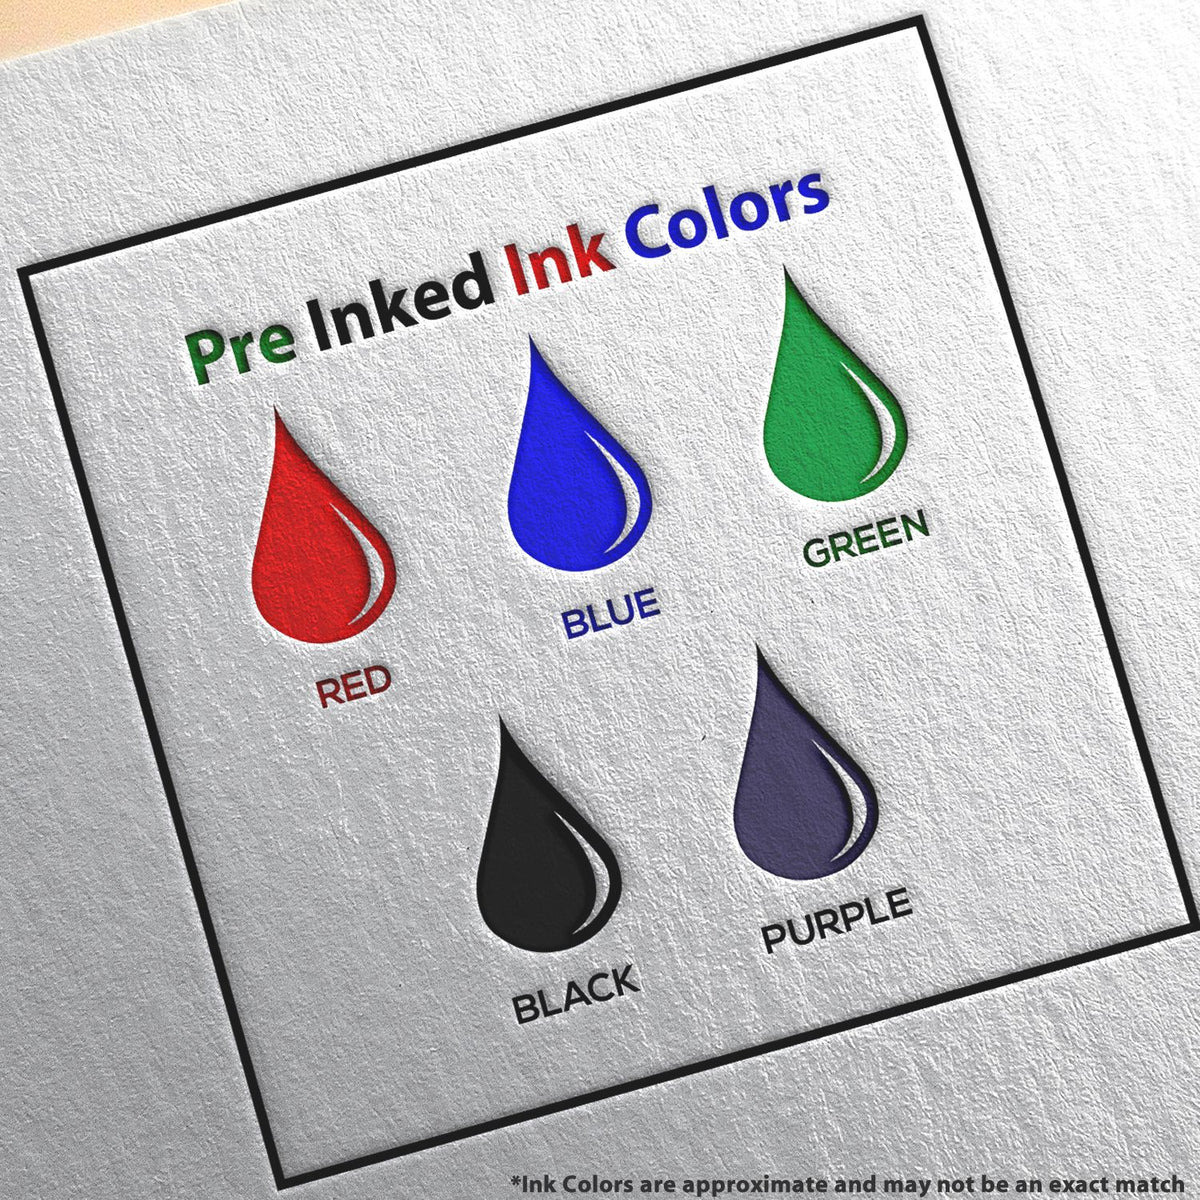 A picture showing the different ink colors or hues available for the PSI Texas Notary Stamp product.